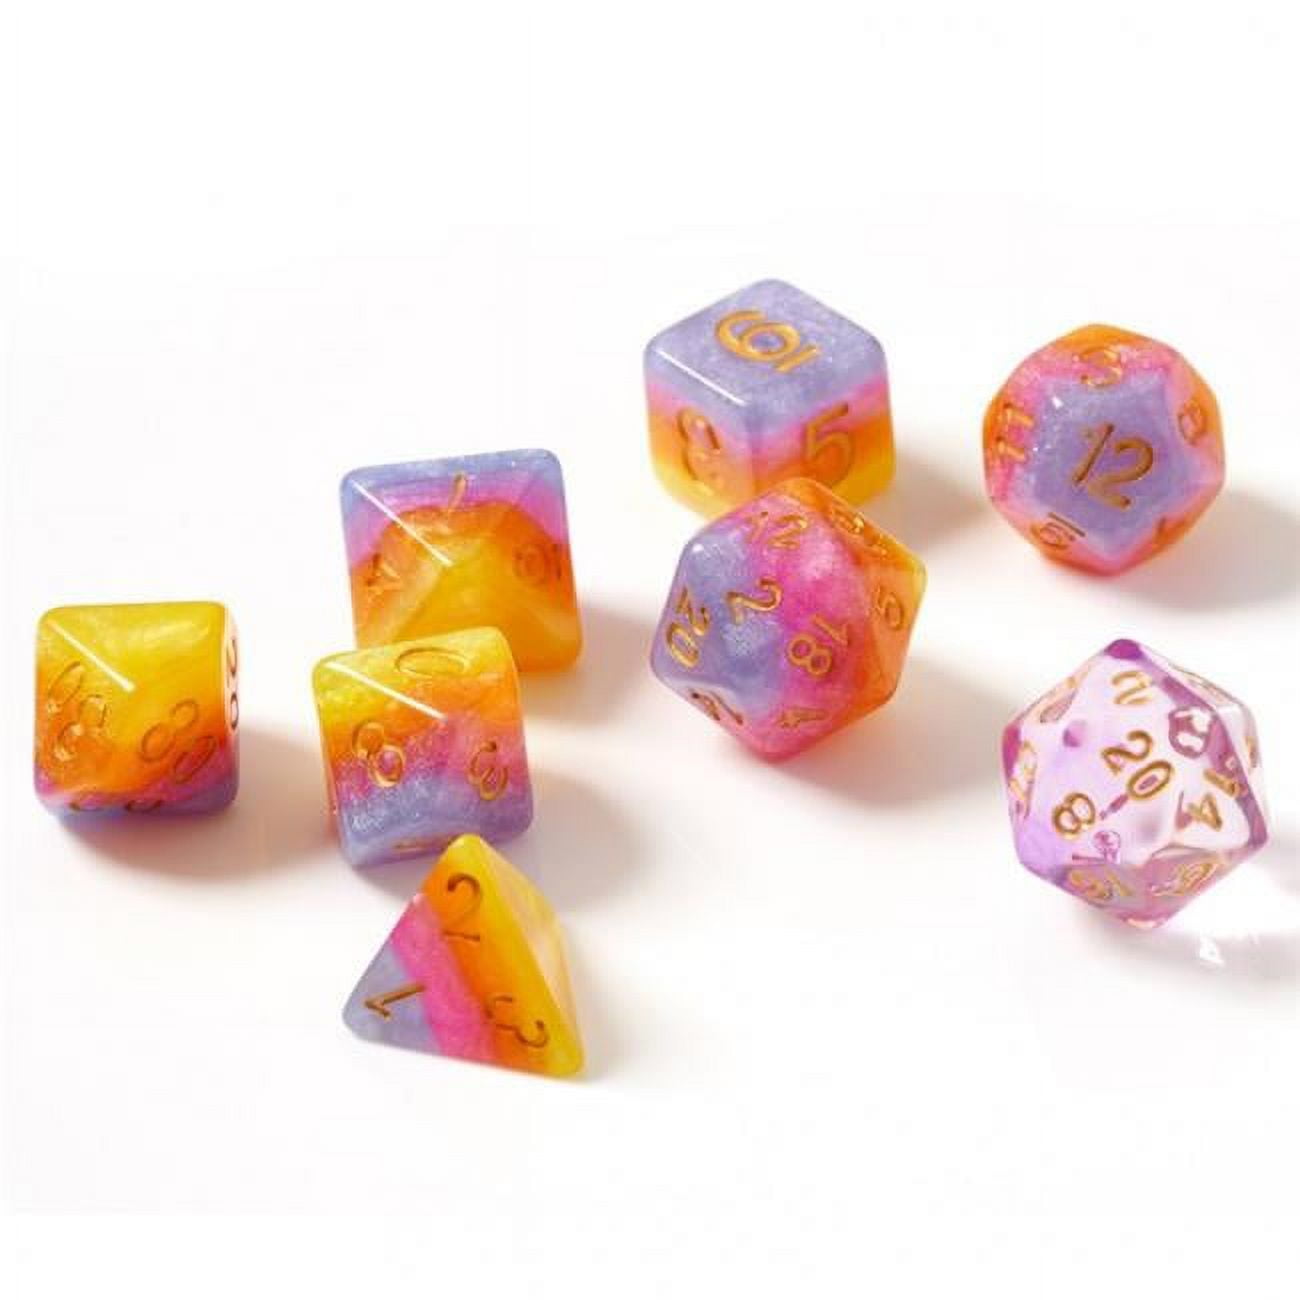 Sdz000302 Tahitian Sunset Dice With Gold Numbers - Set Of 7